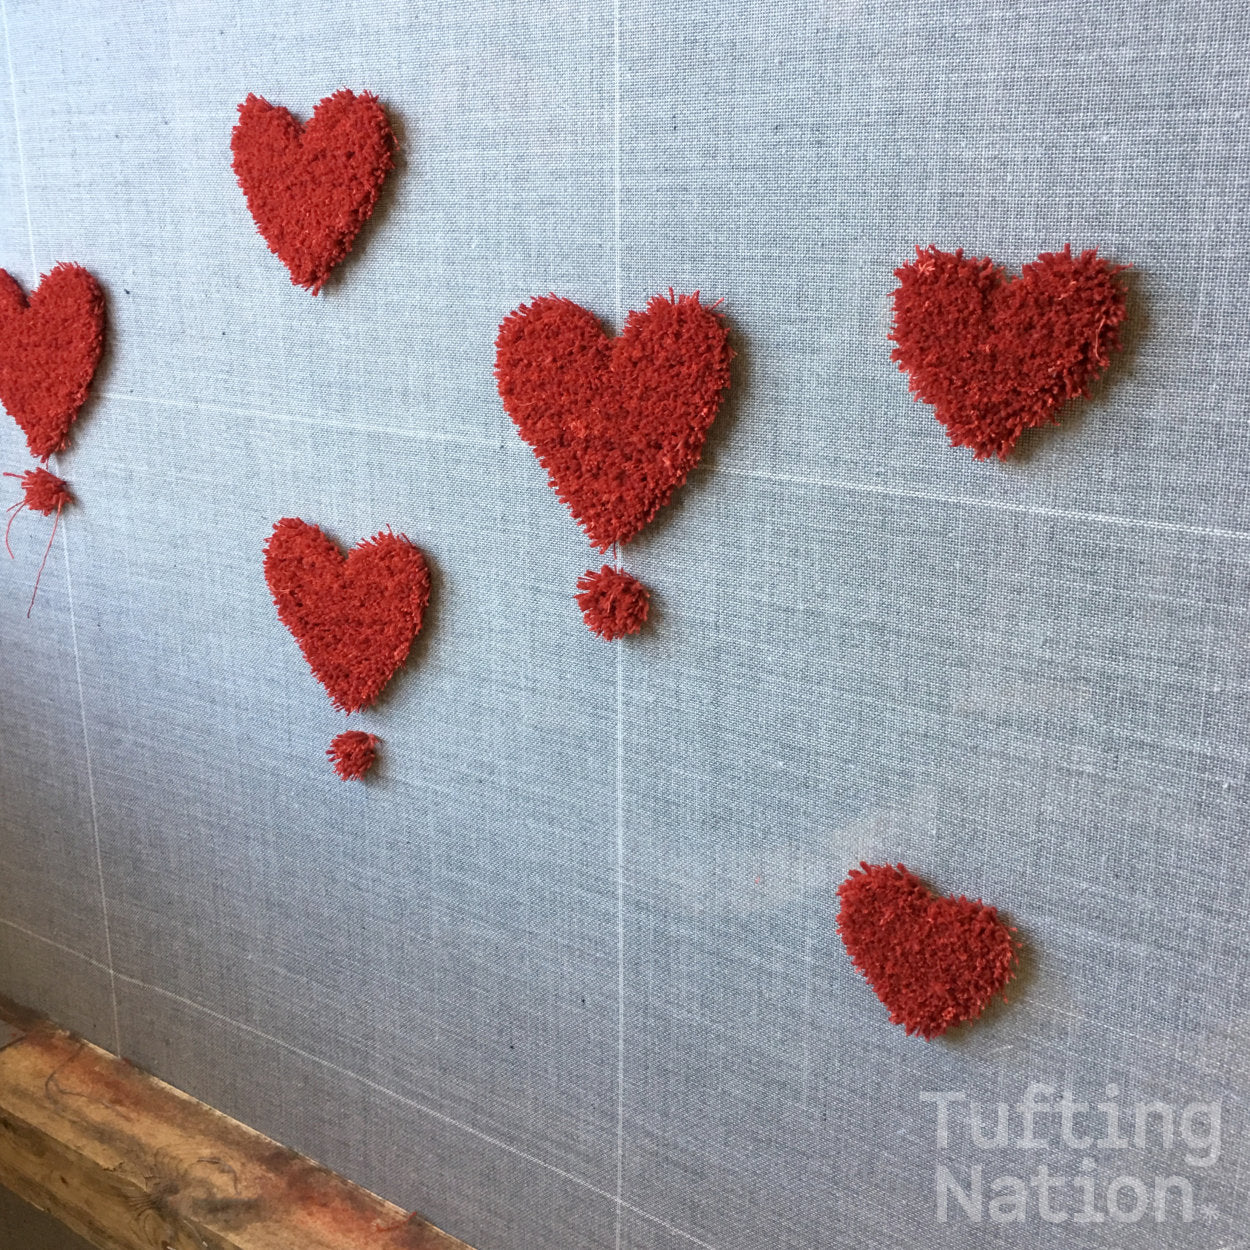 Red Heart Tufted on a Primary Rug Tufting Canvas | TuftingNation